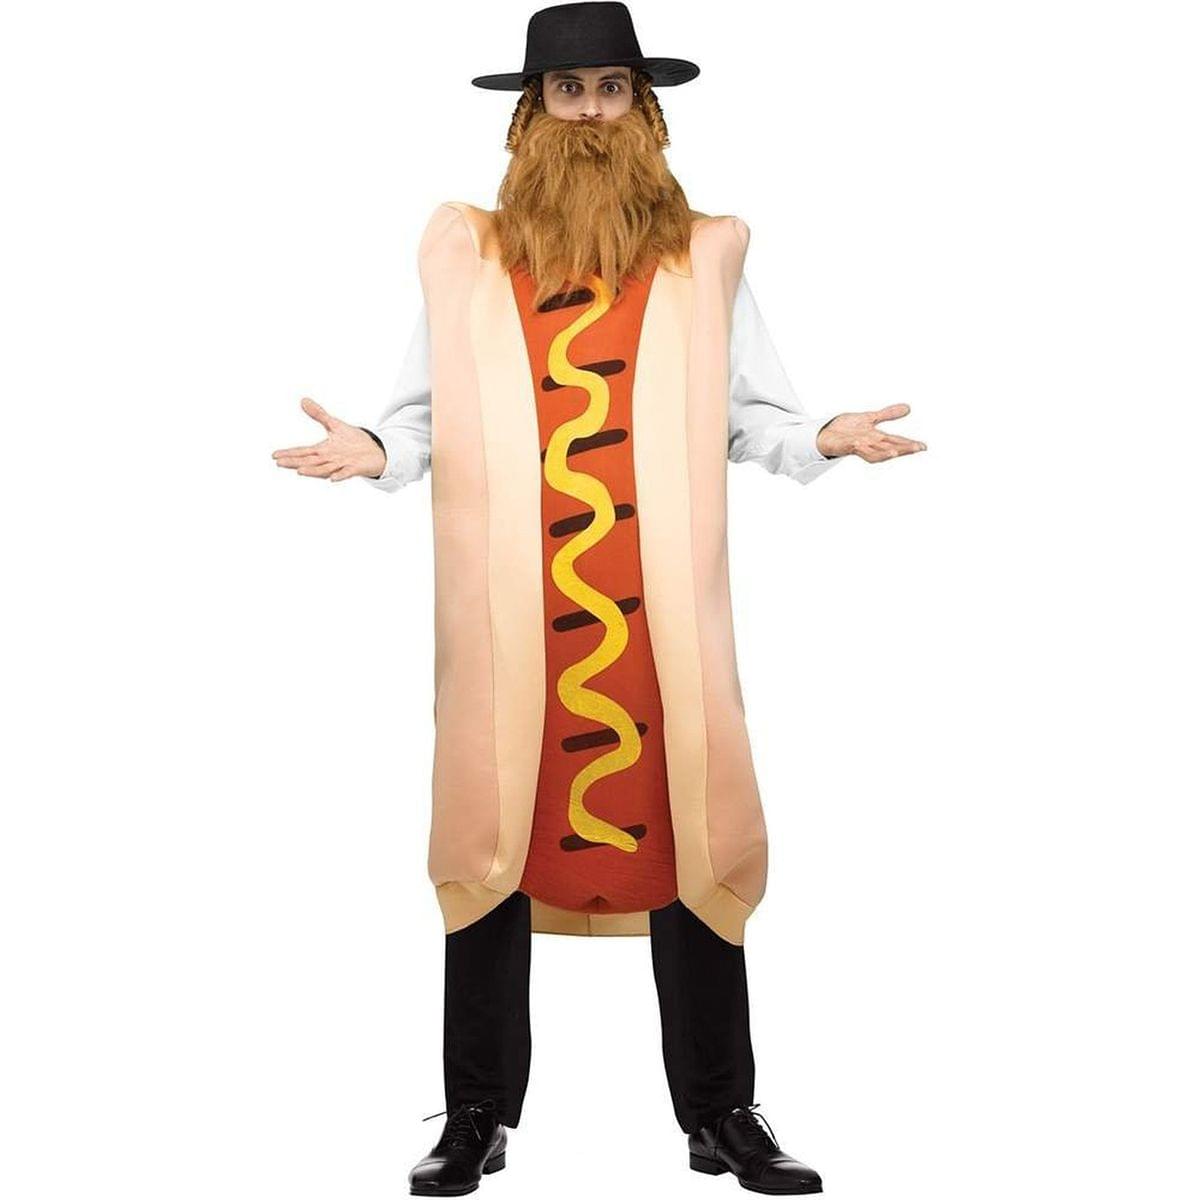 Kosher Hot Dog Adult Costume One Size Fits Most